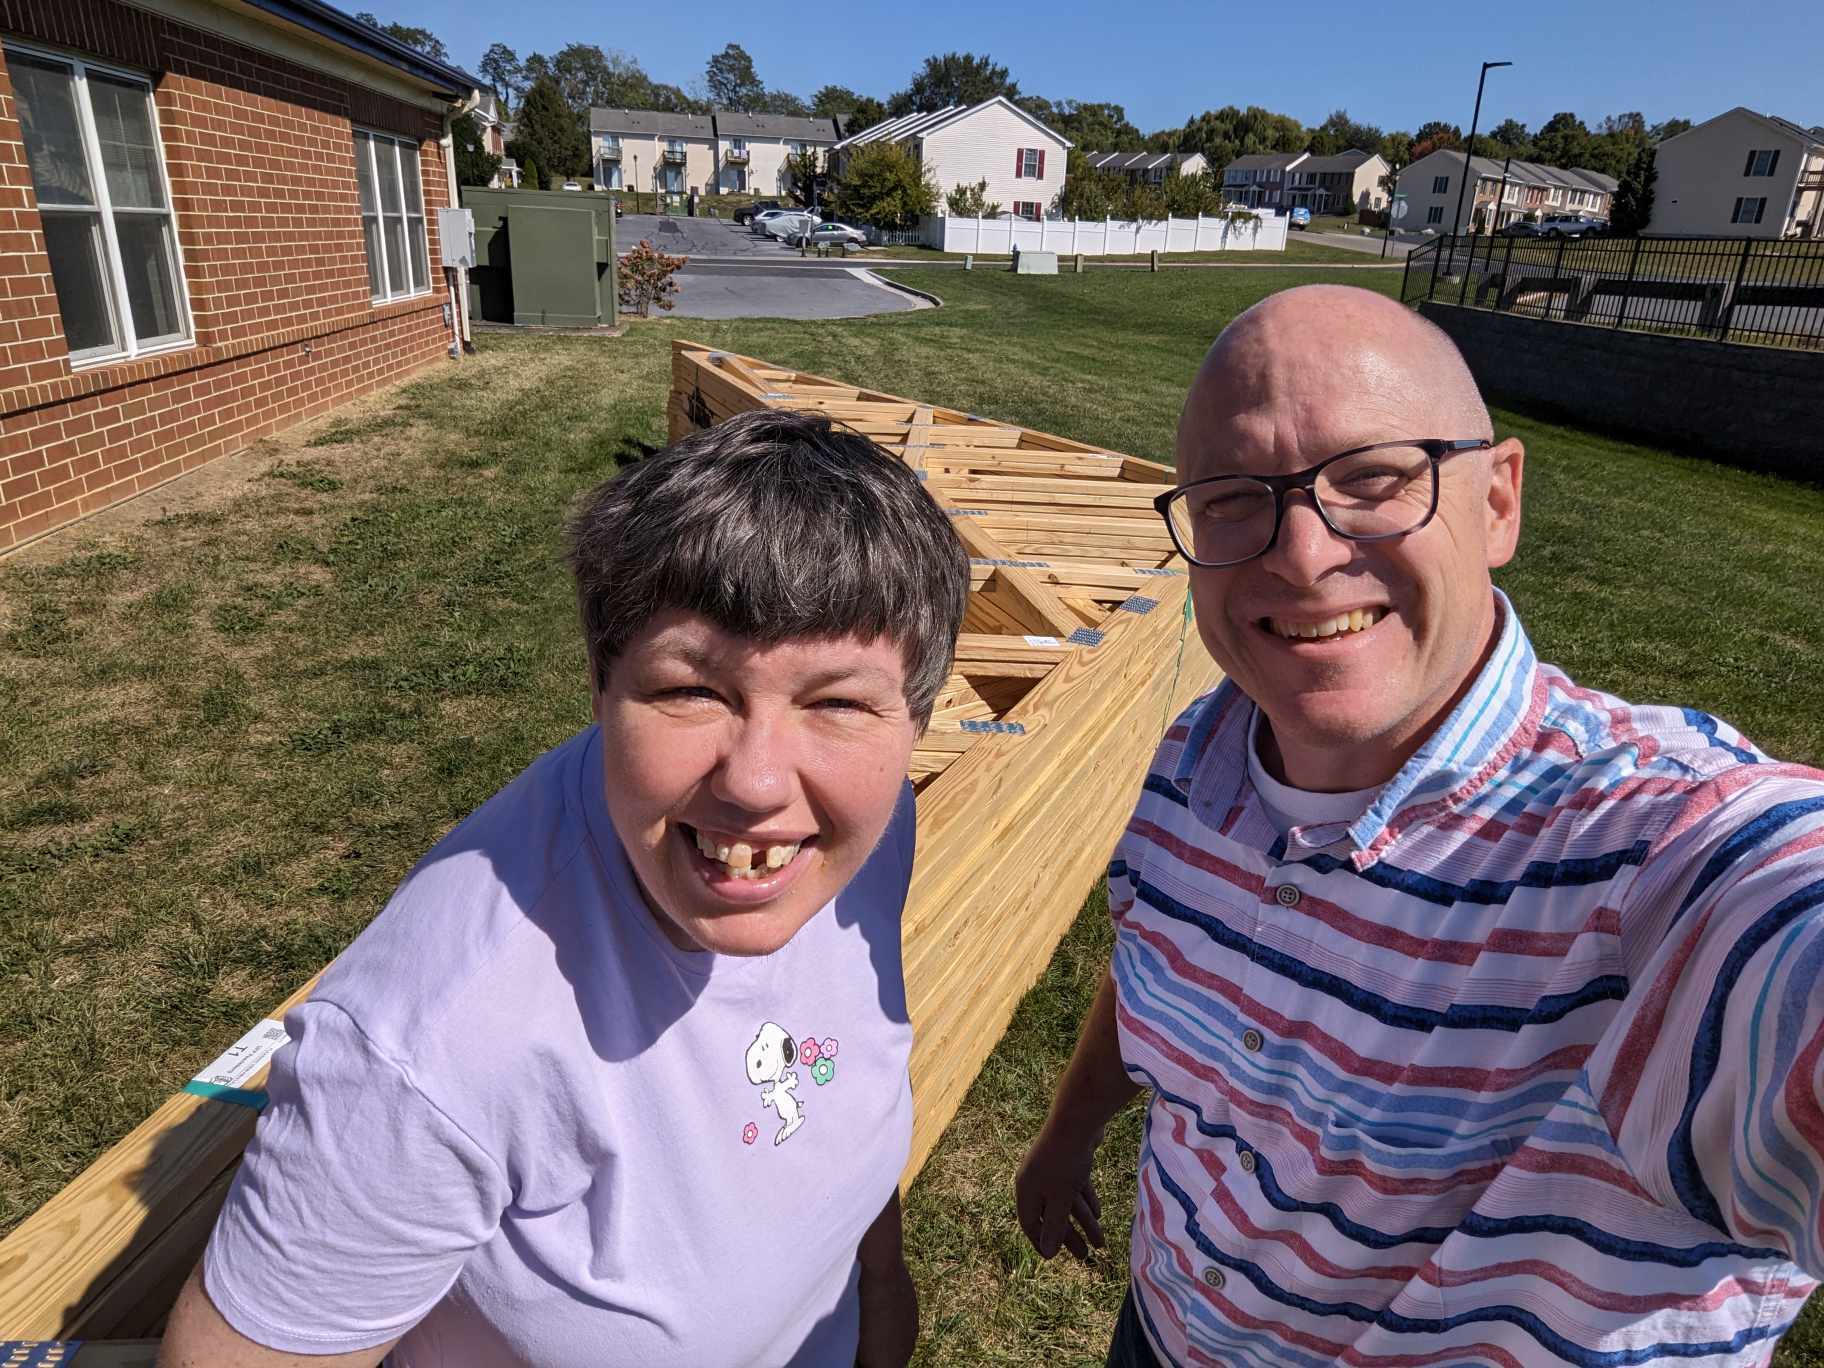 A woman and a man smile as they take a selfie in front of construction materials